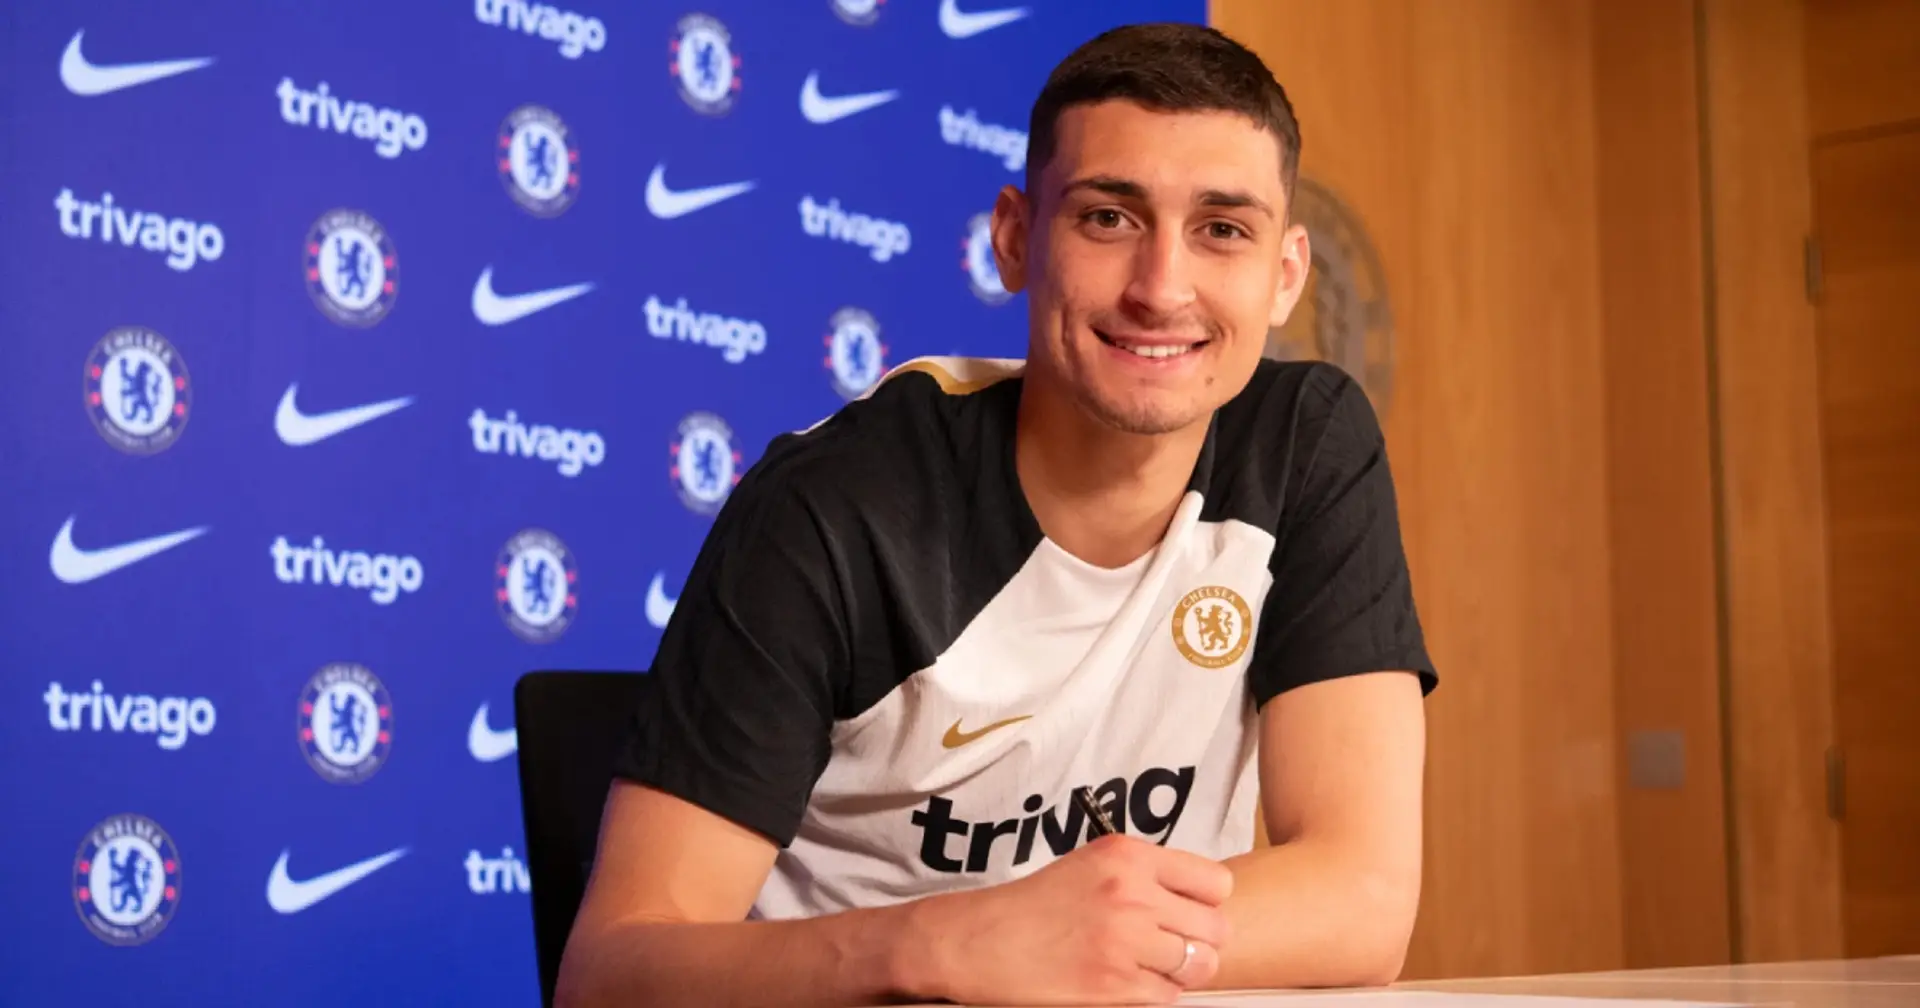 'It’s a big step for me': Djordje Petrovic's first words as Chelsea player